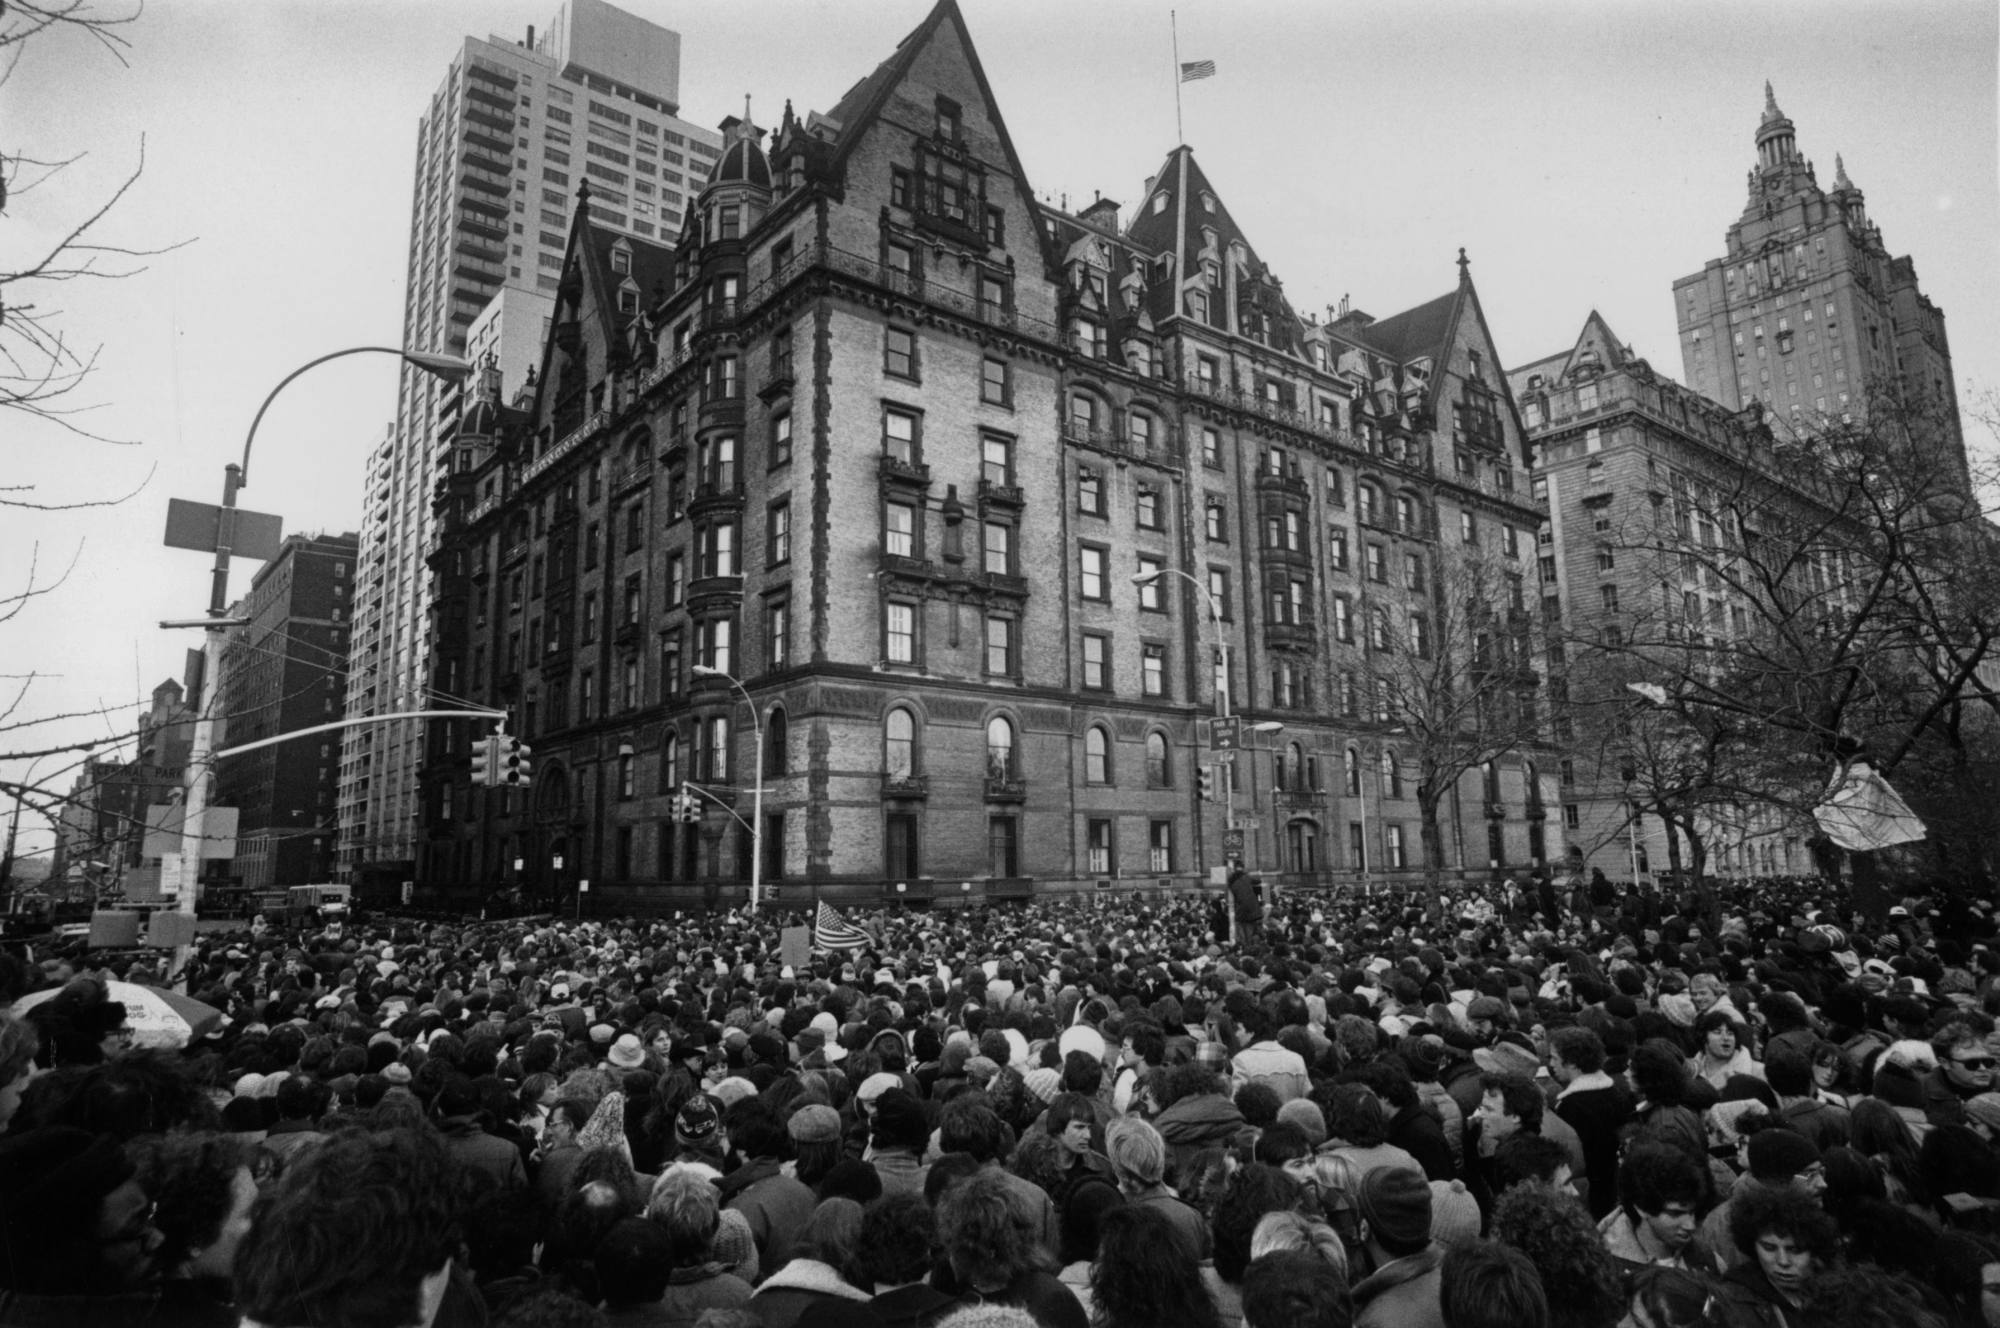 Crowds gather outside the home of John Lennon in New York in December, 1980, after the news that he had been shot and killed. Photo: Getty Images